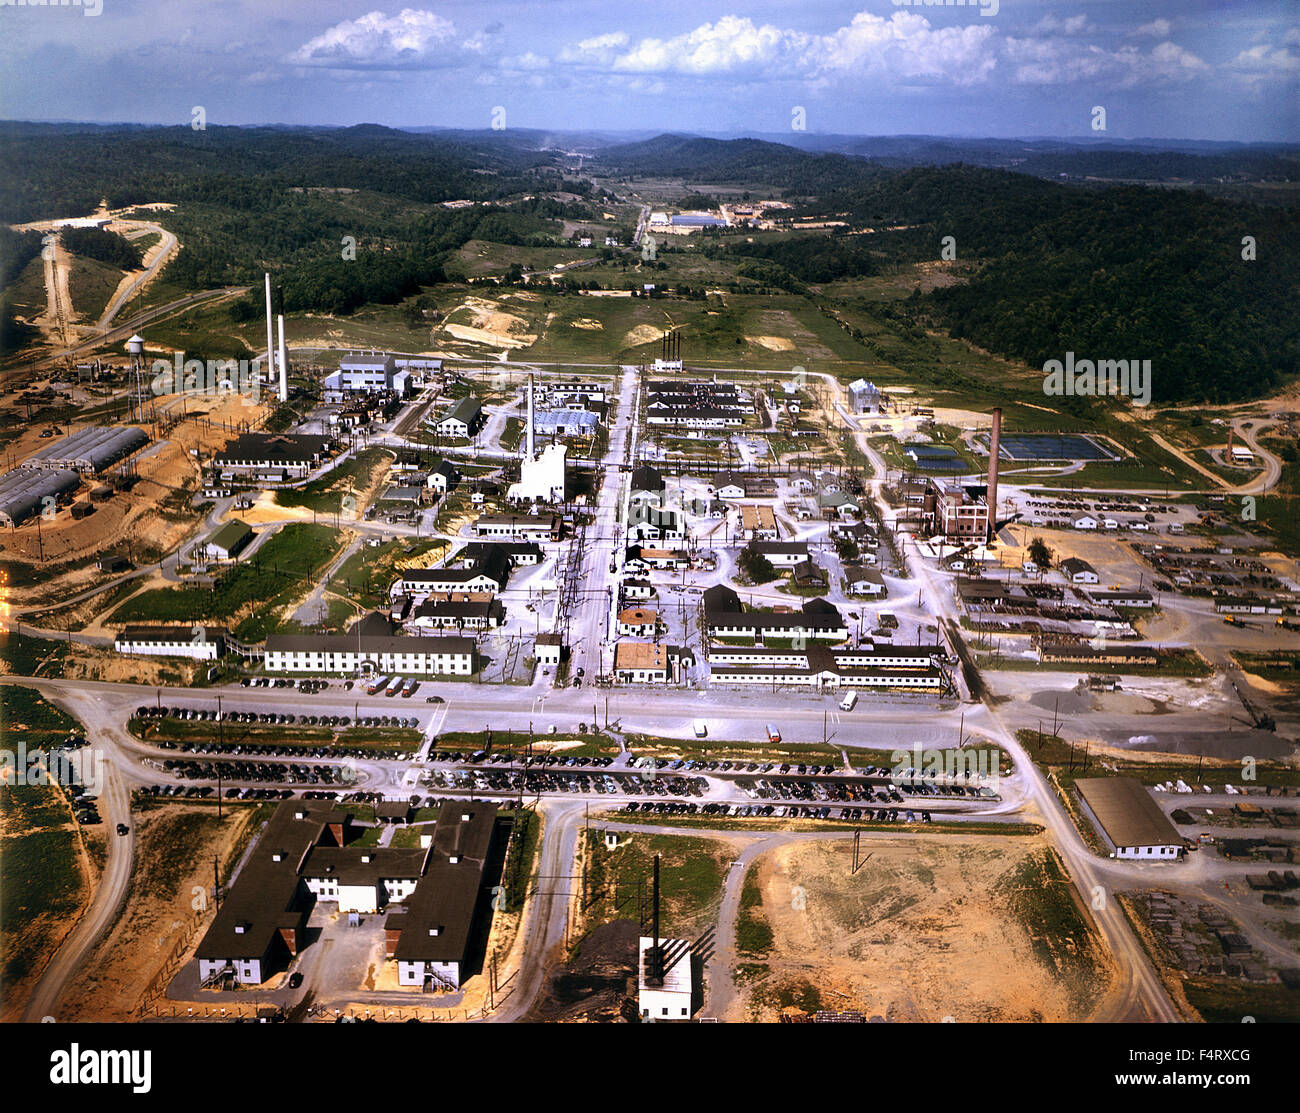 Oak Ridge National Laboratory. 1947. The town of Oak Ridge was established by the Army Corps of Engineers as part of the Clinton Stock Photo